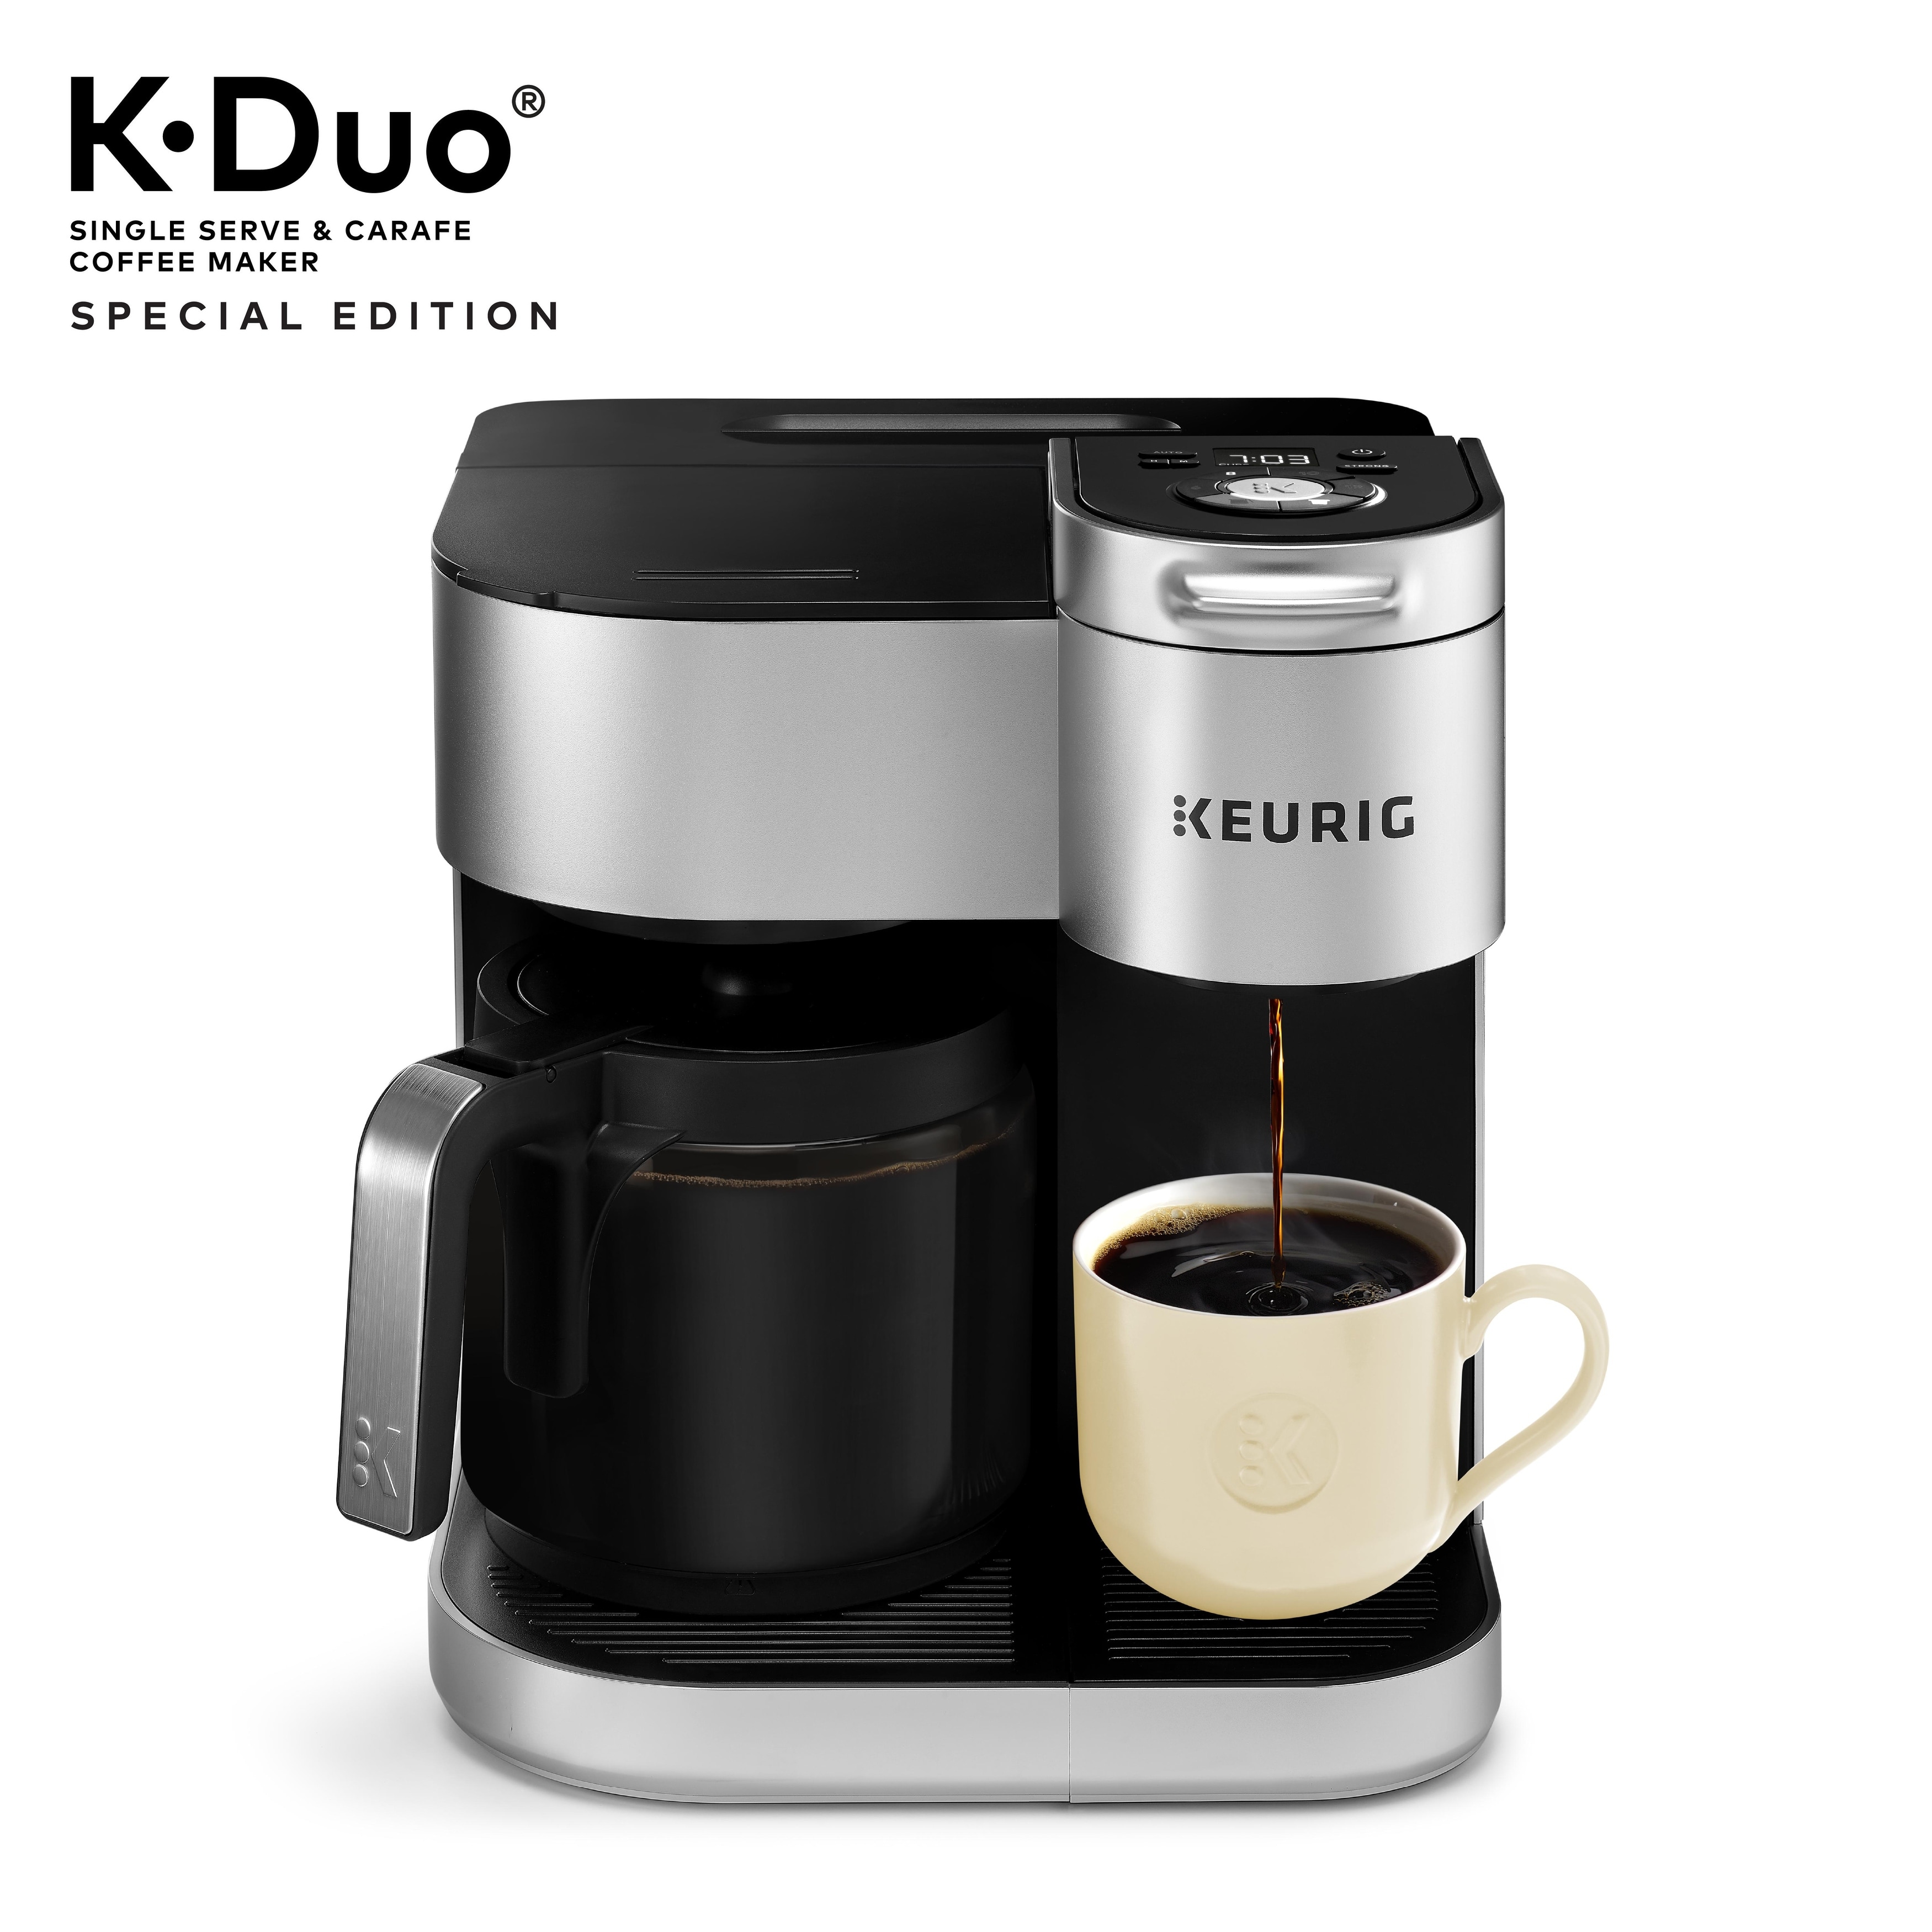 https://ak1.ostkcdn.com/images/products/is/images/direct/cfb2de7e3a883d7ba6ebbf2044a59d4bc021b4b6/Keurig%C2%AE-K-Duo%C2%AE-Special-Edition-Single-Serve-%26-Carafe-Coffee-Maker.jpg